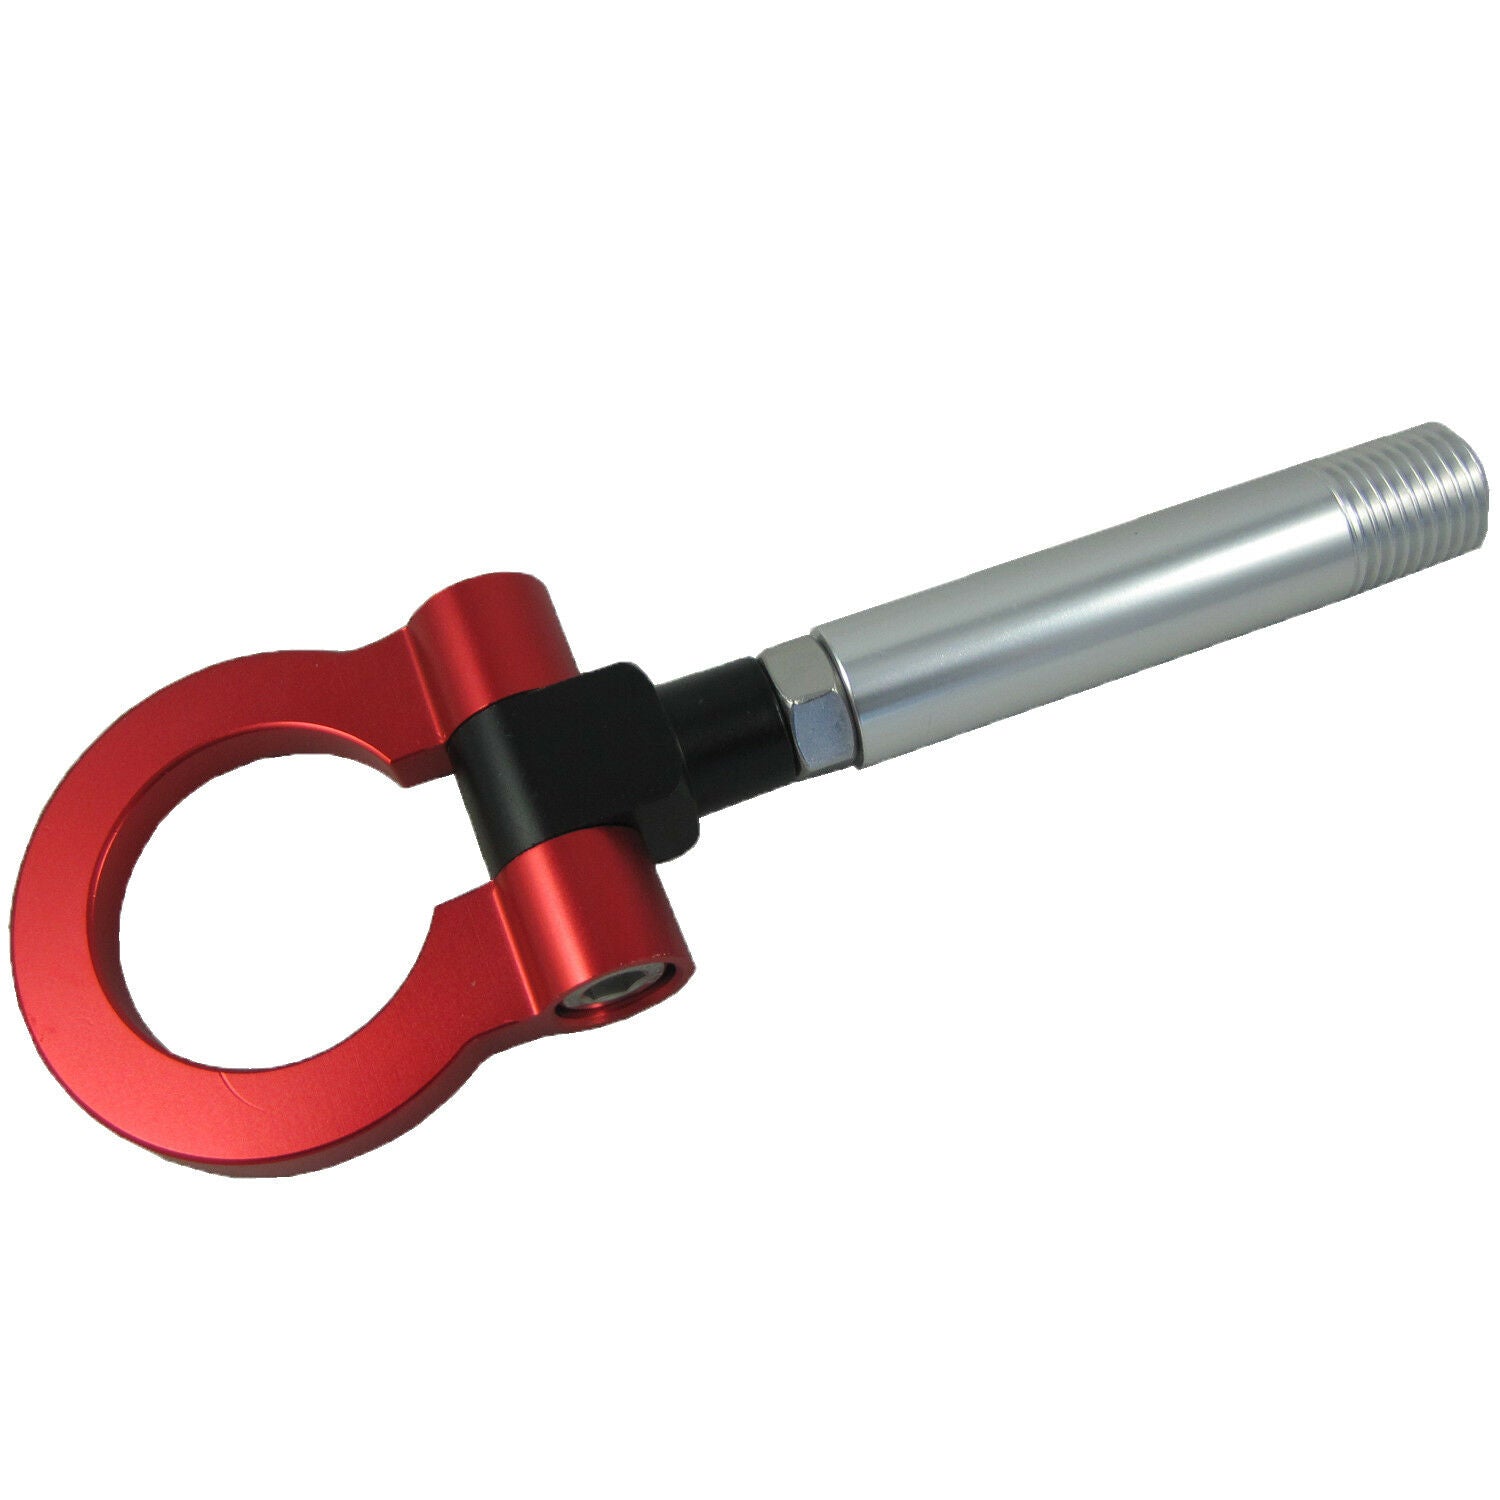 JDMSPEED RED FOLDING SCREW ON TYPE ALUMINUM FRONT REAR TOW HOOK